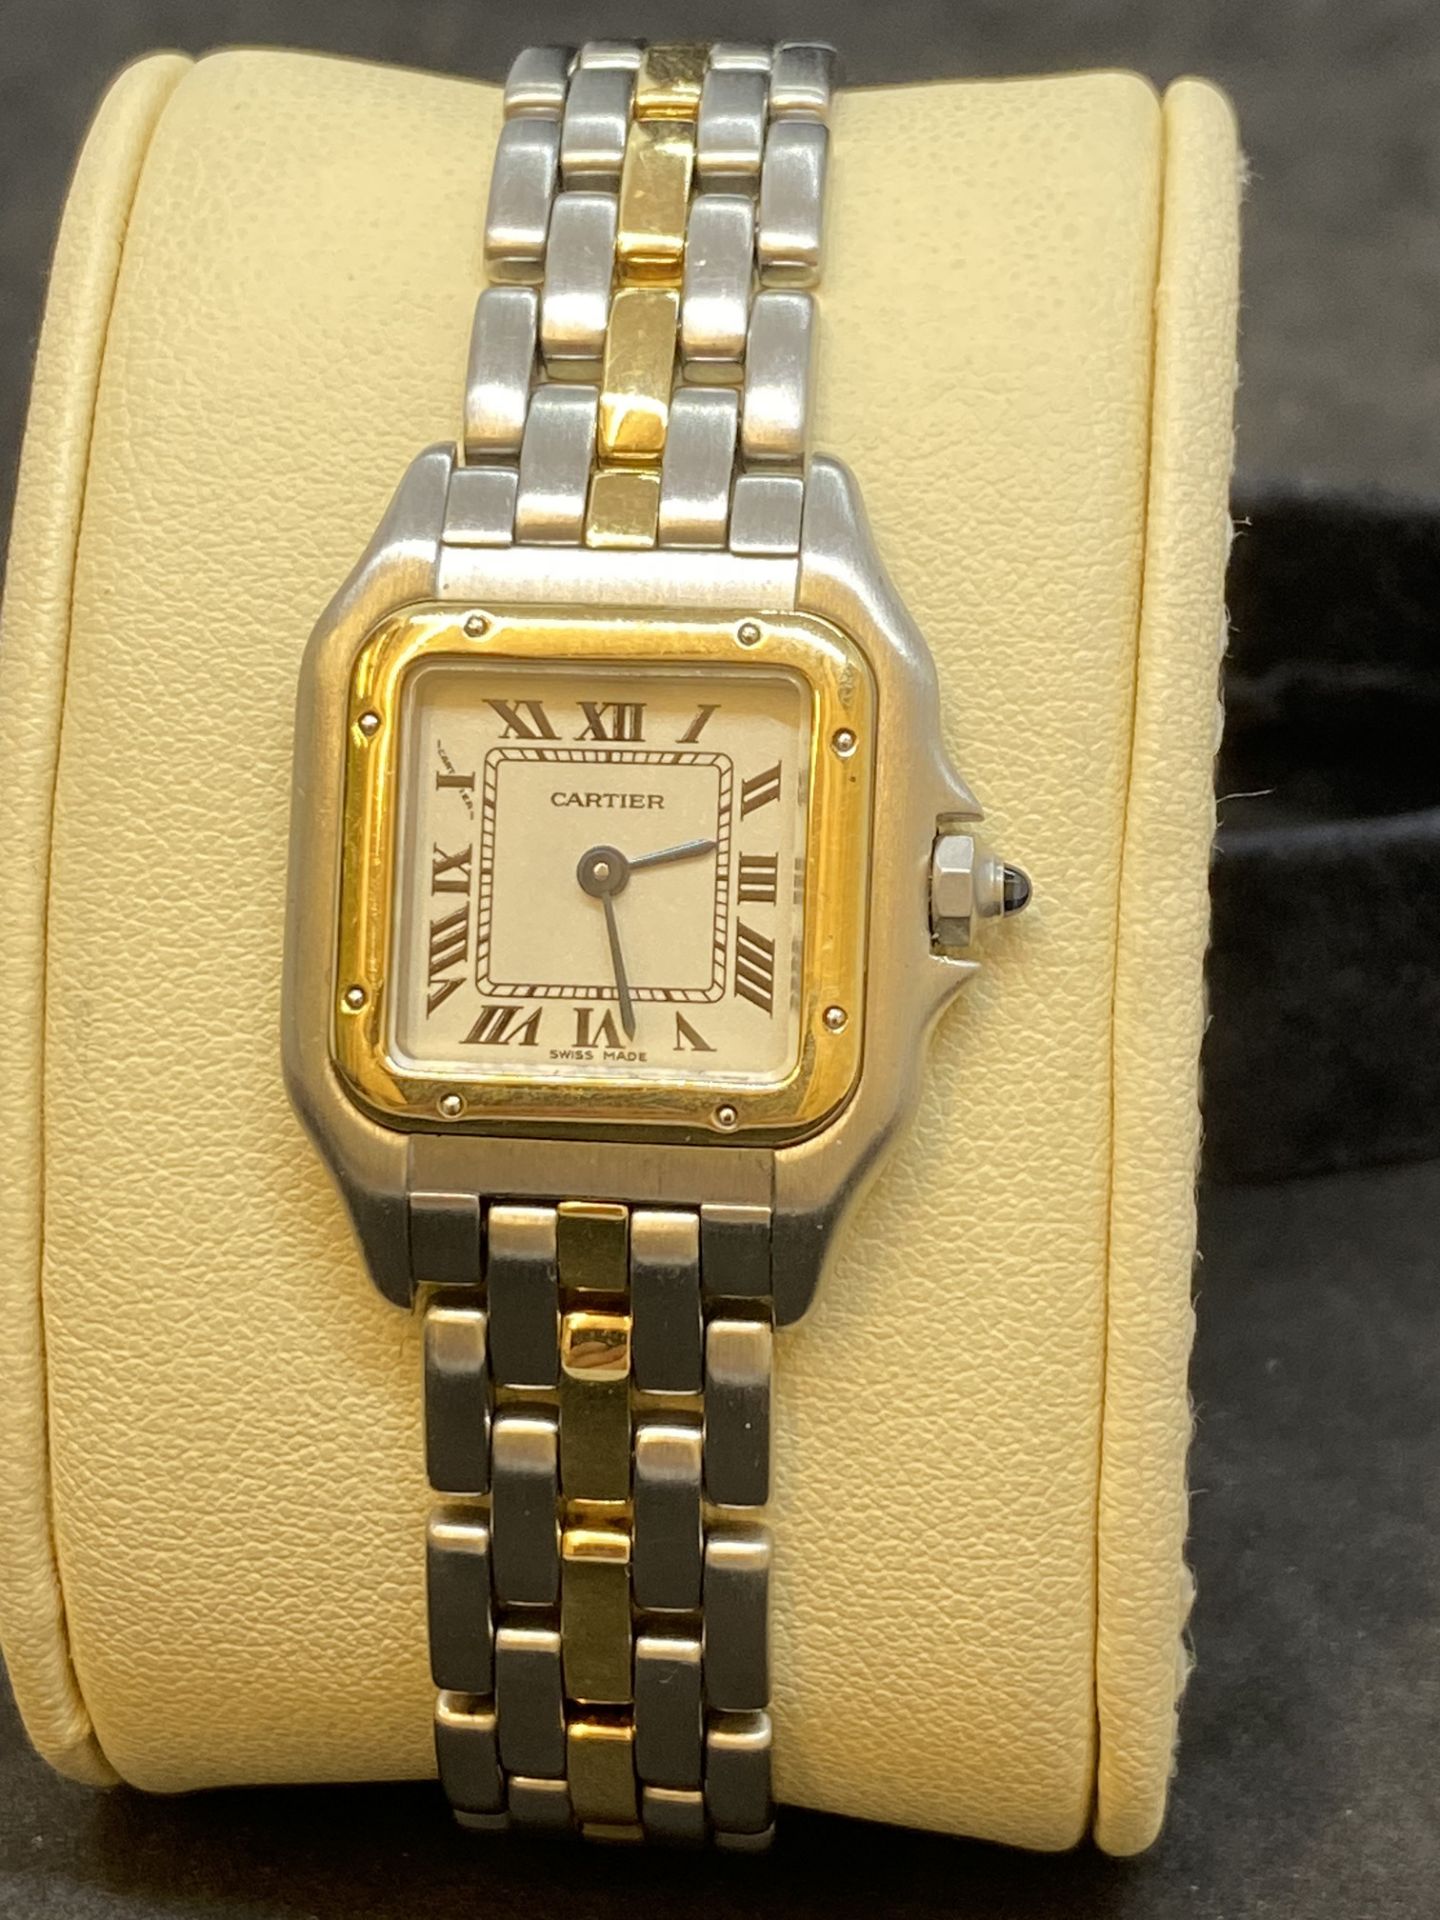 STEEL & GOLD CARTIER PANTHER WATCH - Image 5 of 10